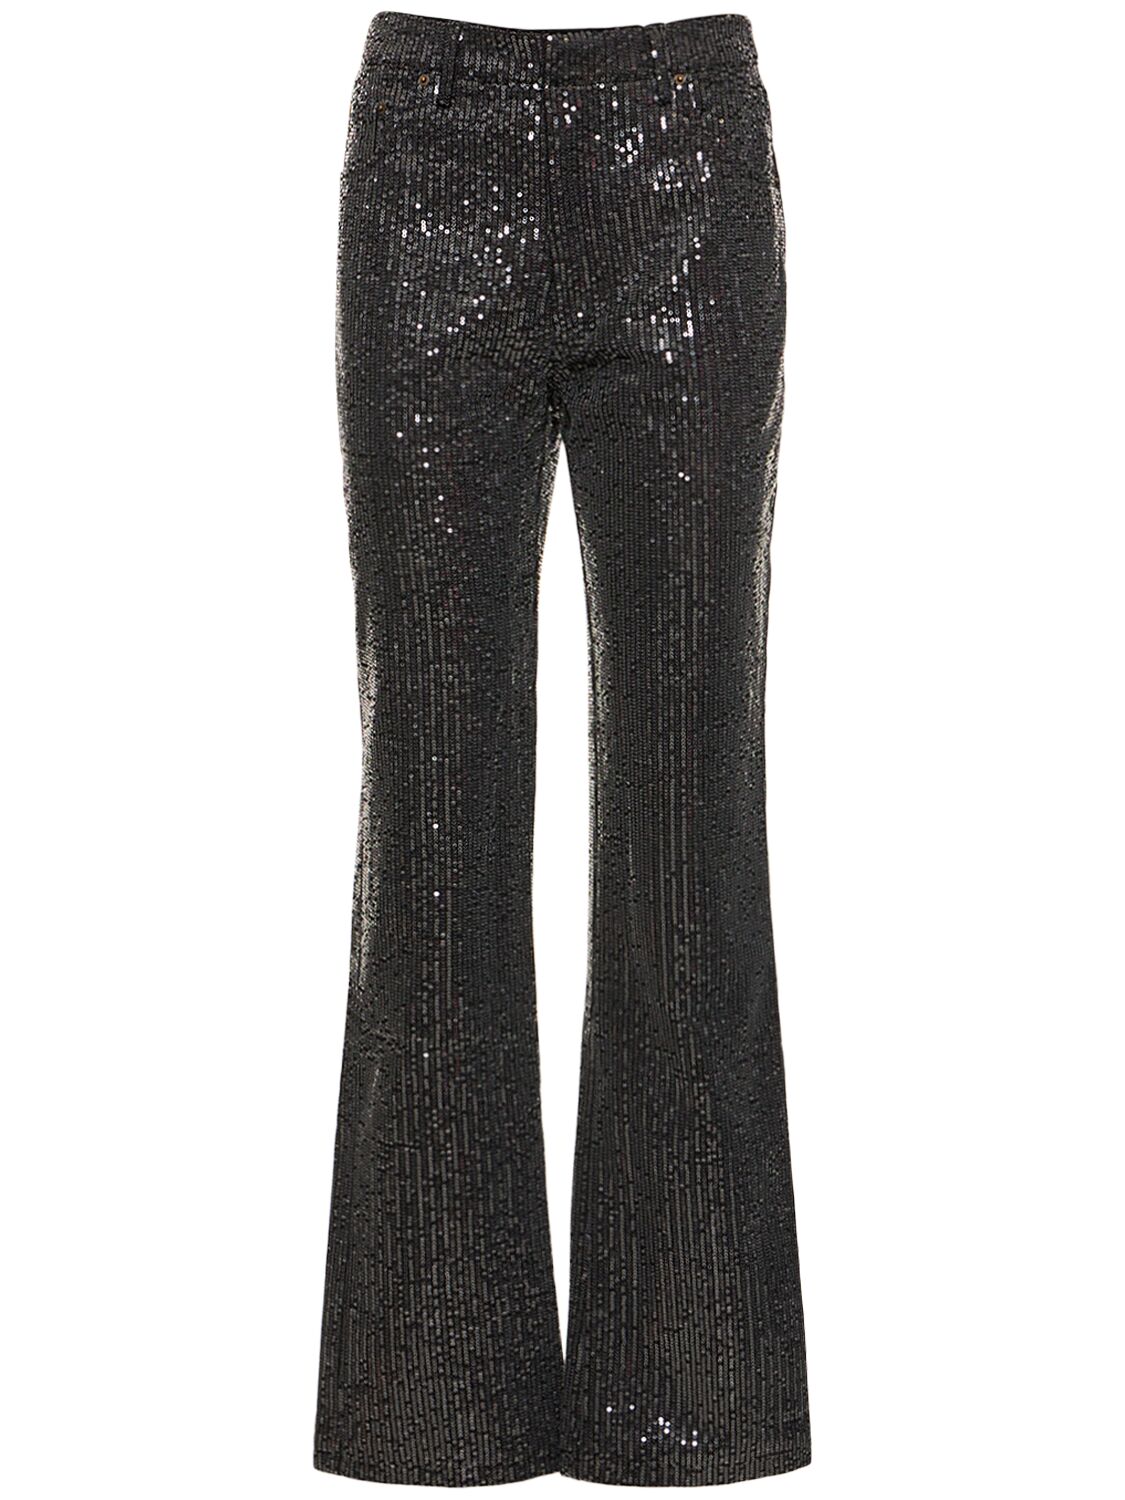 Rotate Birger Christensen Sequined Twill Pants In Black